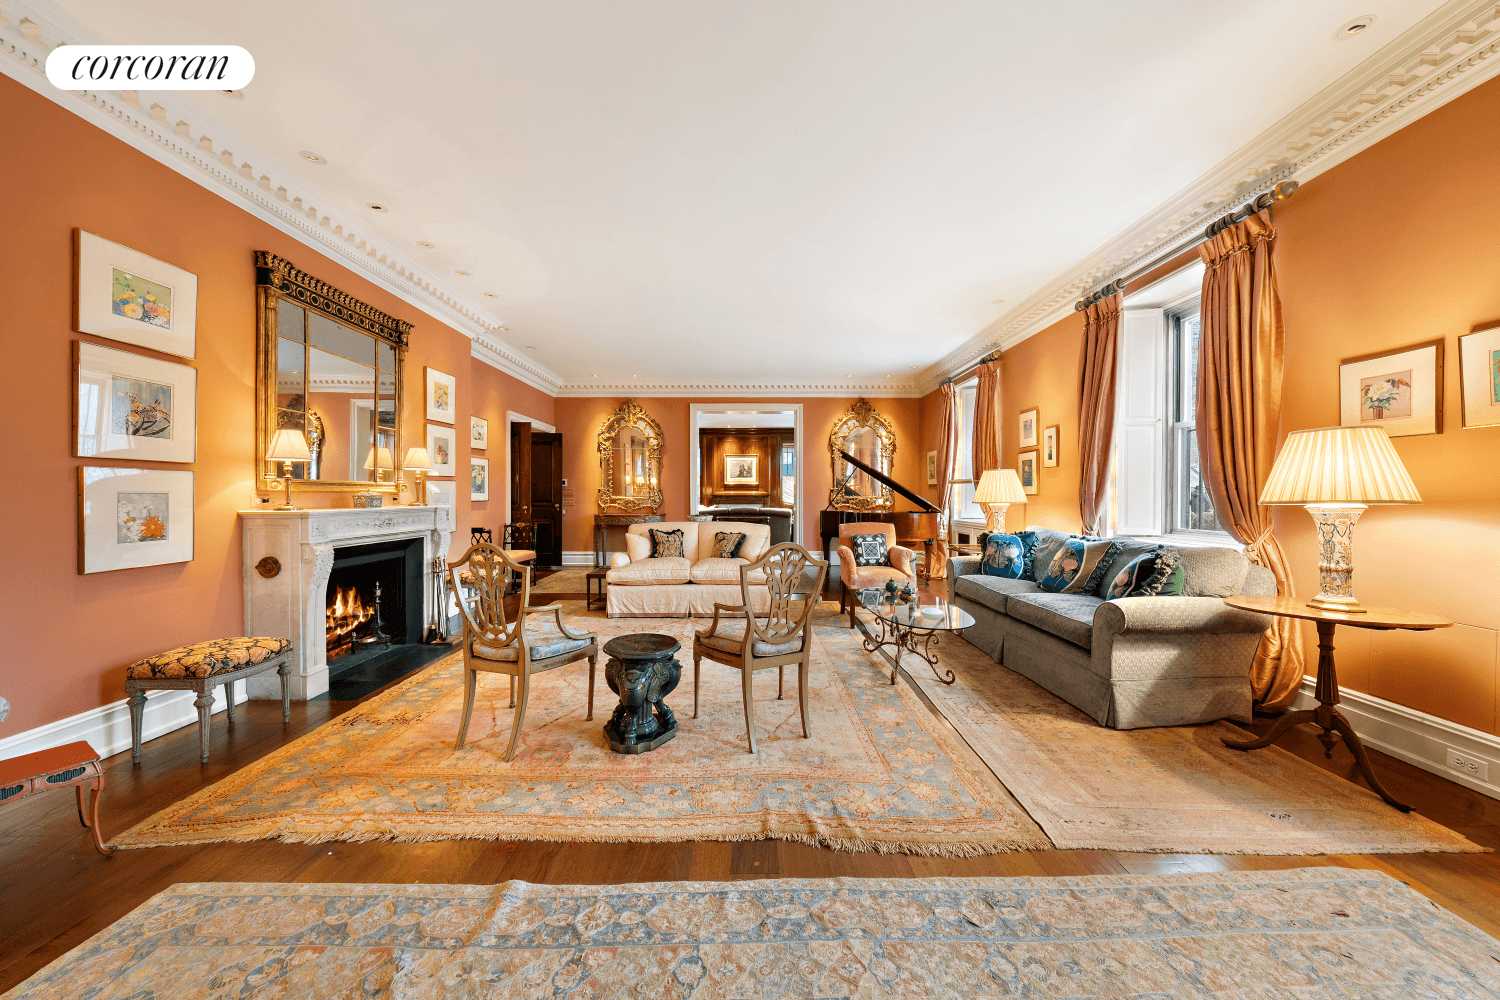 This exceptional maisonette at 834 Fifth Avenue, a Candela masterpiece in scale and design, offers a once in a generation opportunity to own a 5, 000 square foot duplex with ...